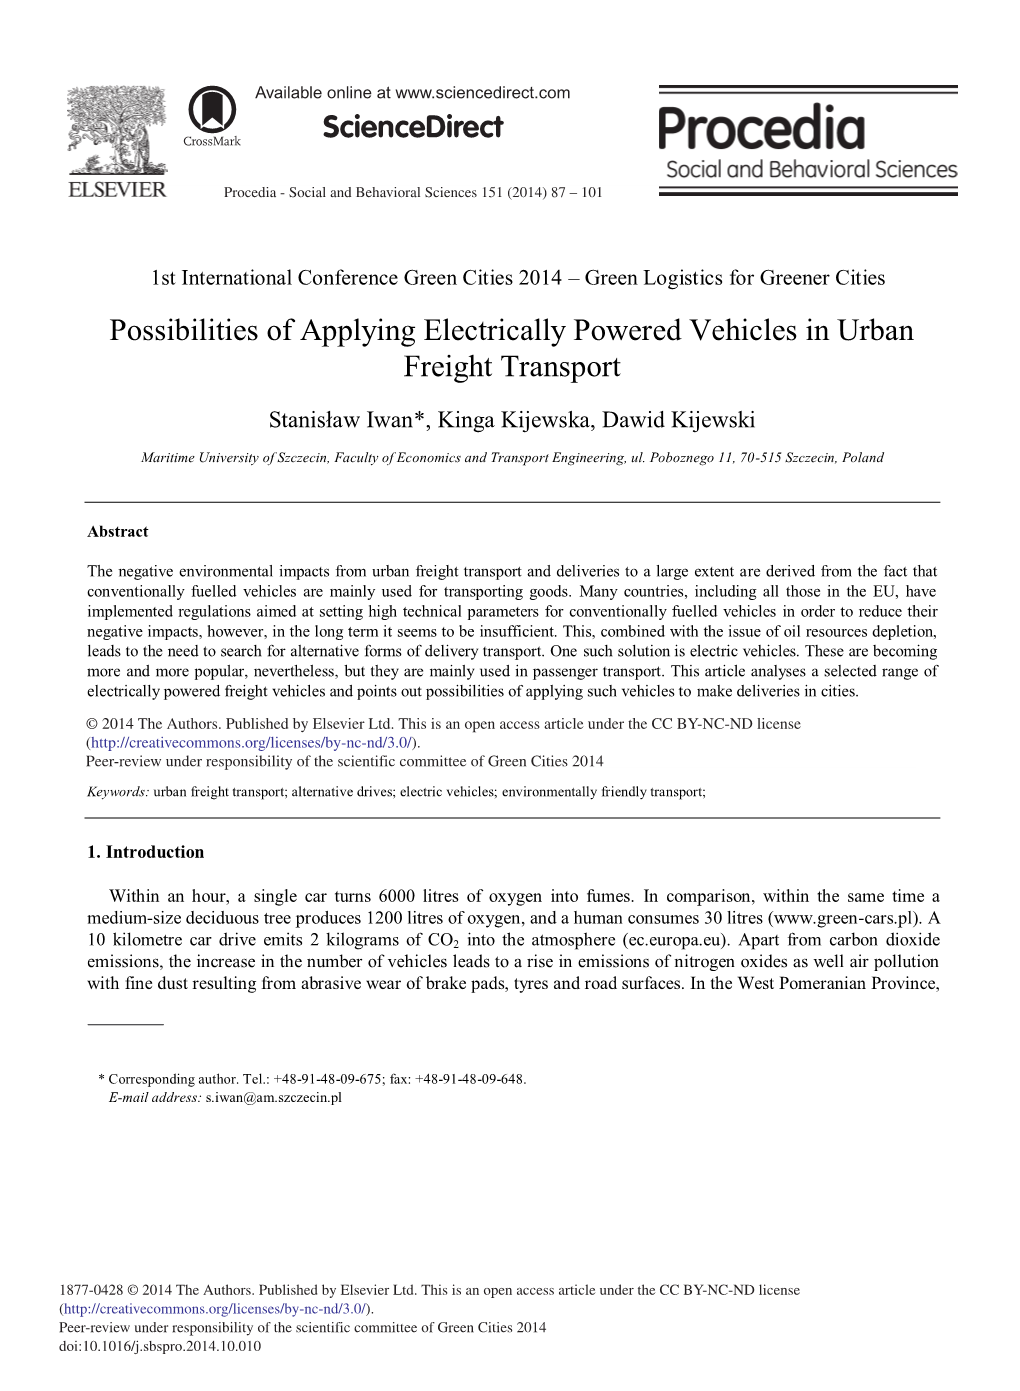 Possibilities of Applying Electrically Powered Vehicles in Urban Freight Transport